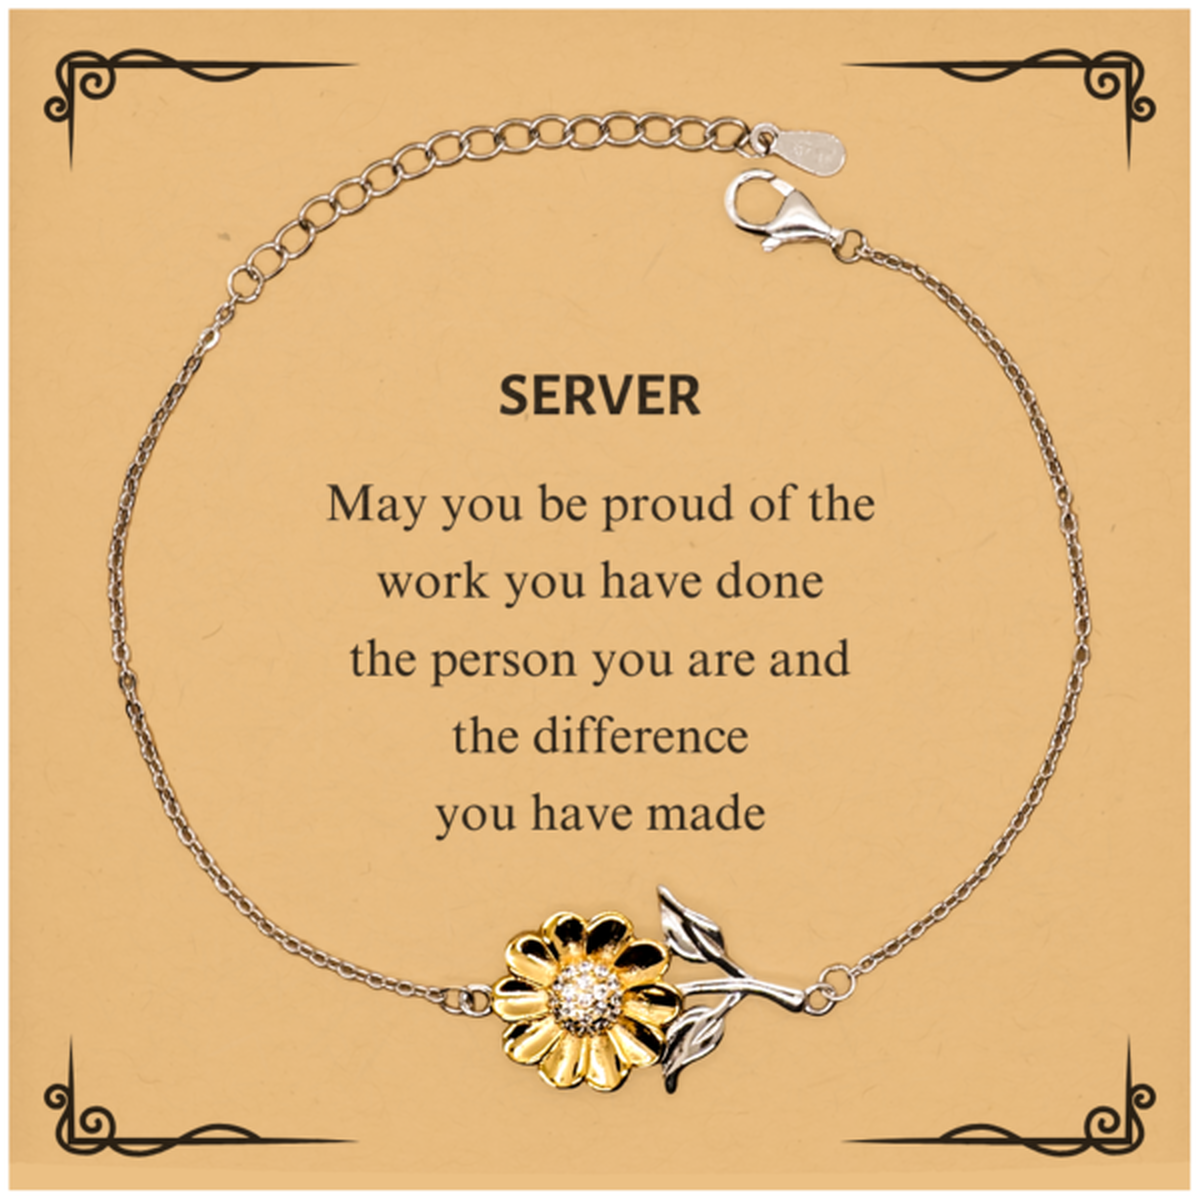 Server May you be proud of the work you have done, Retirement Server Sunflower Bracelet for Colleague Appreciation Gifts Amazing for Server